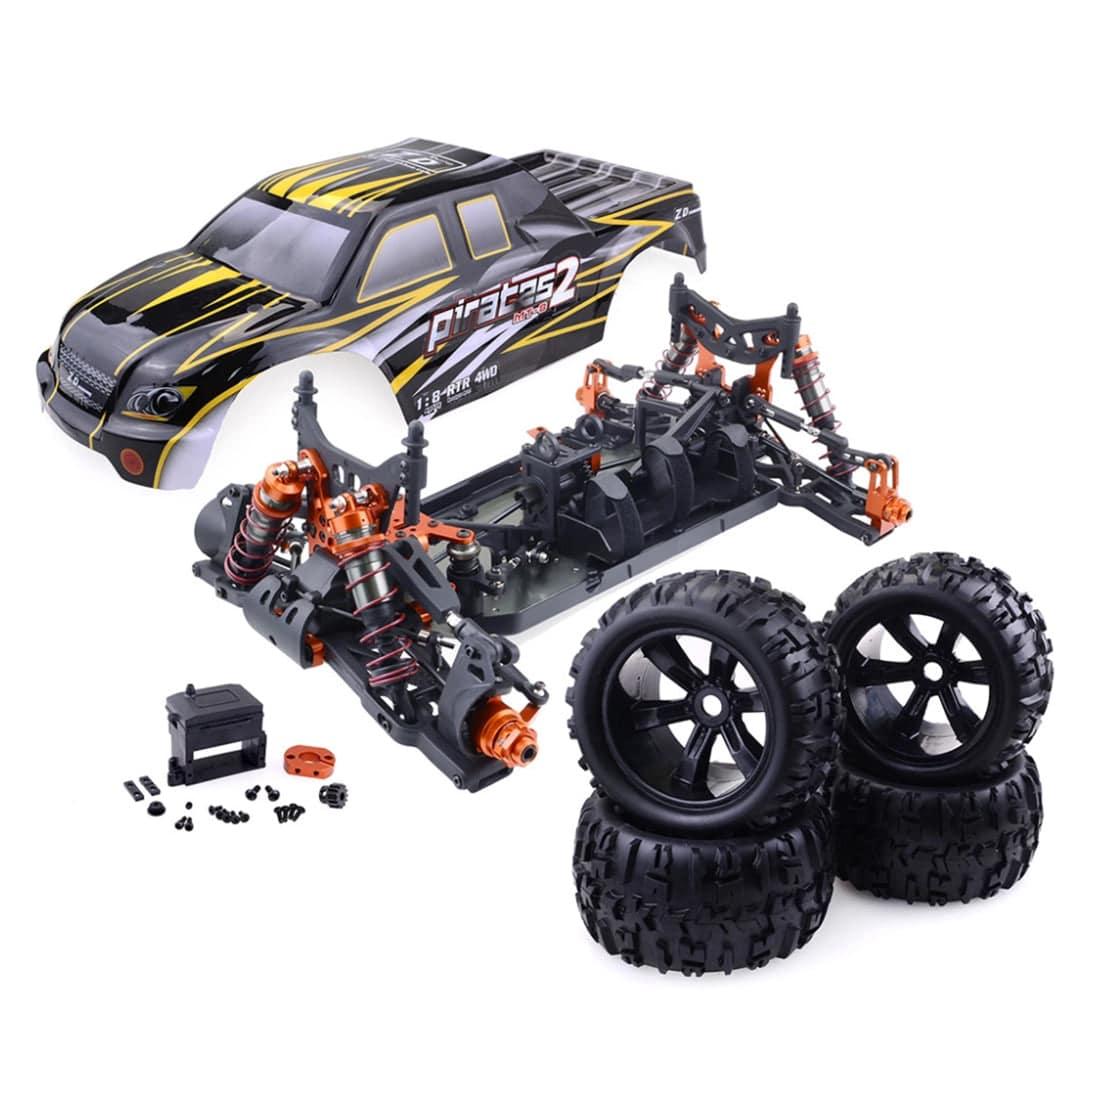 Zd Racing 9116: Top-rated remote control car for speed, durability, and maneuverability